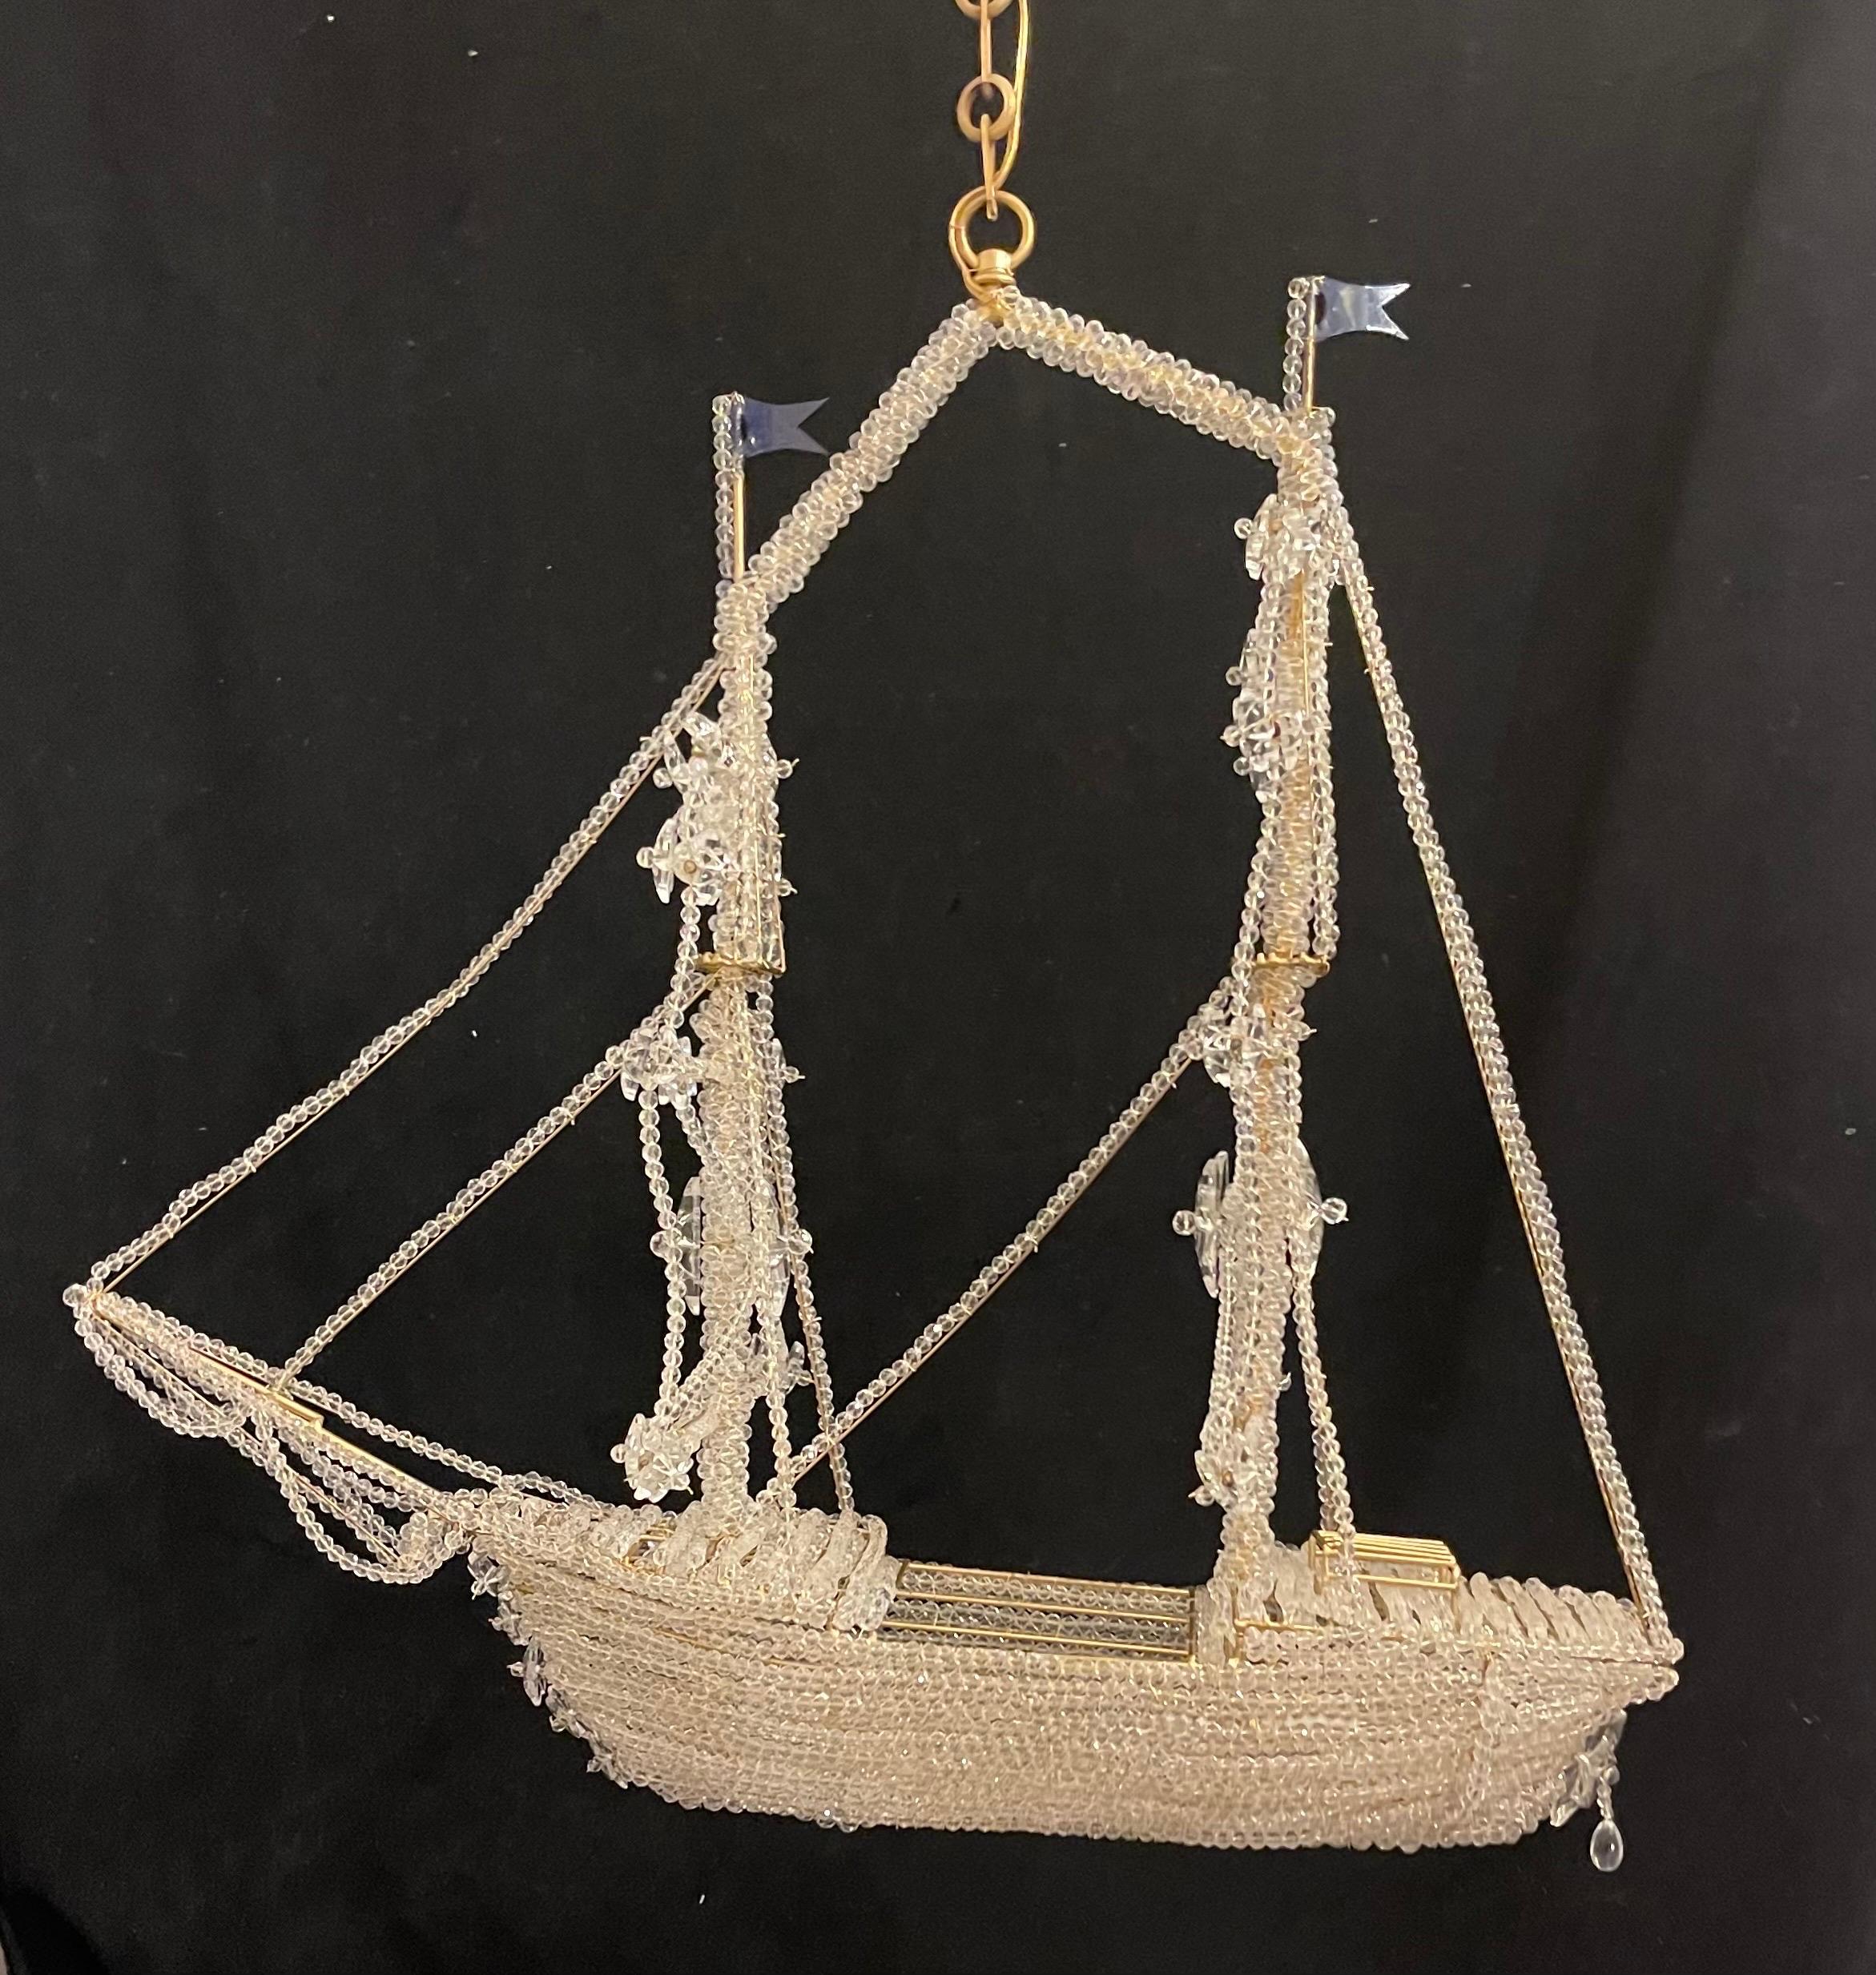 A wonderful boat / ship chandelier that is beautifully detailed with a beaded crystal hull and sails crystal star accents throughout. Outfitted with 3 internal lights, In the manner of Baguès.
This would be a beautiful addition to any space!
This